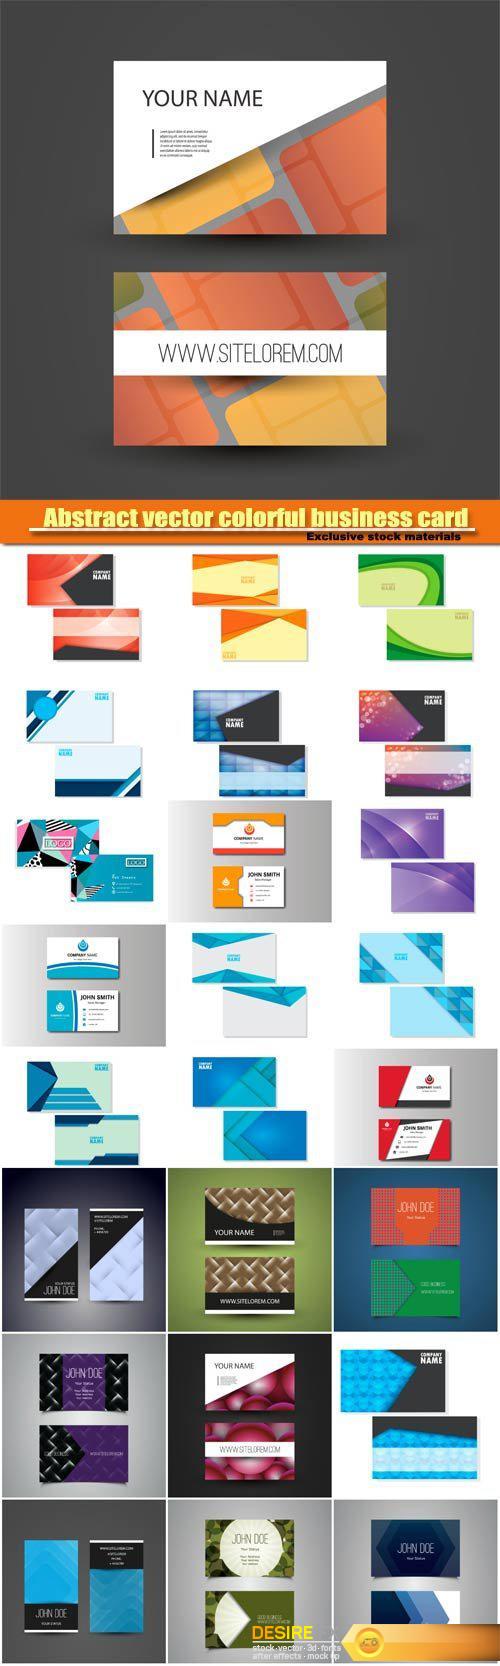 Abstract vector colorful business card template